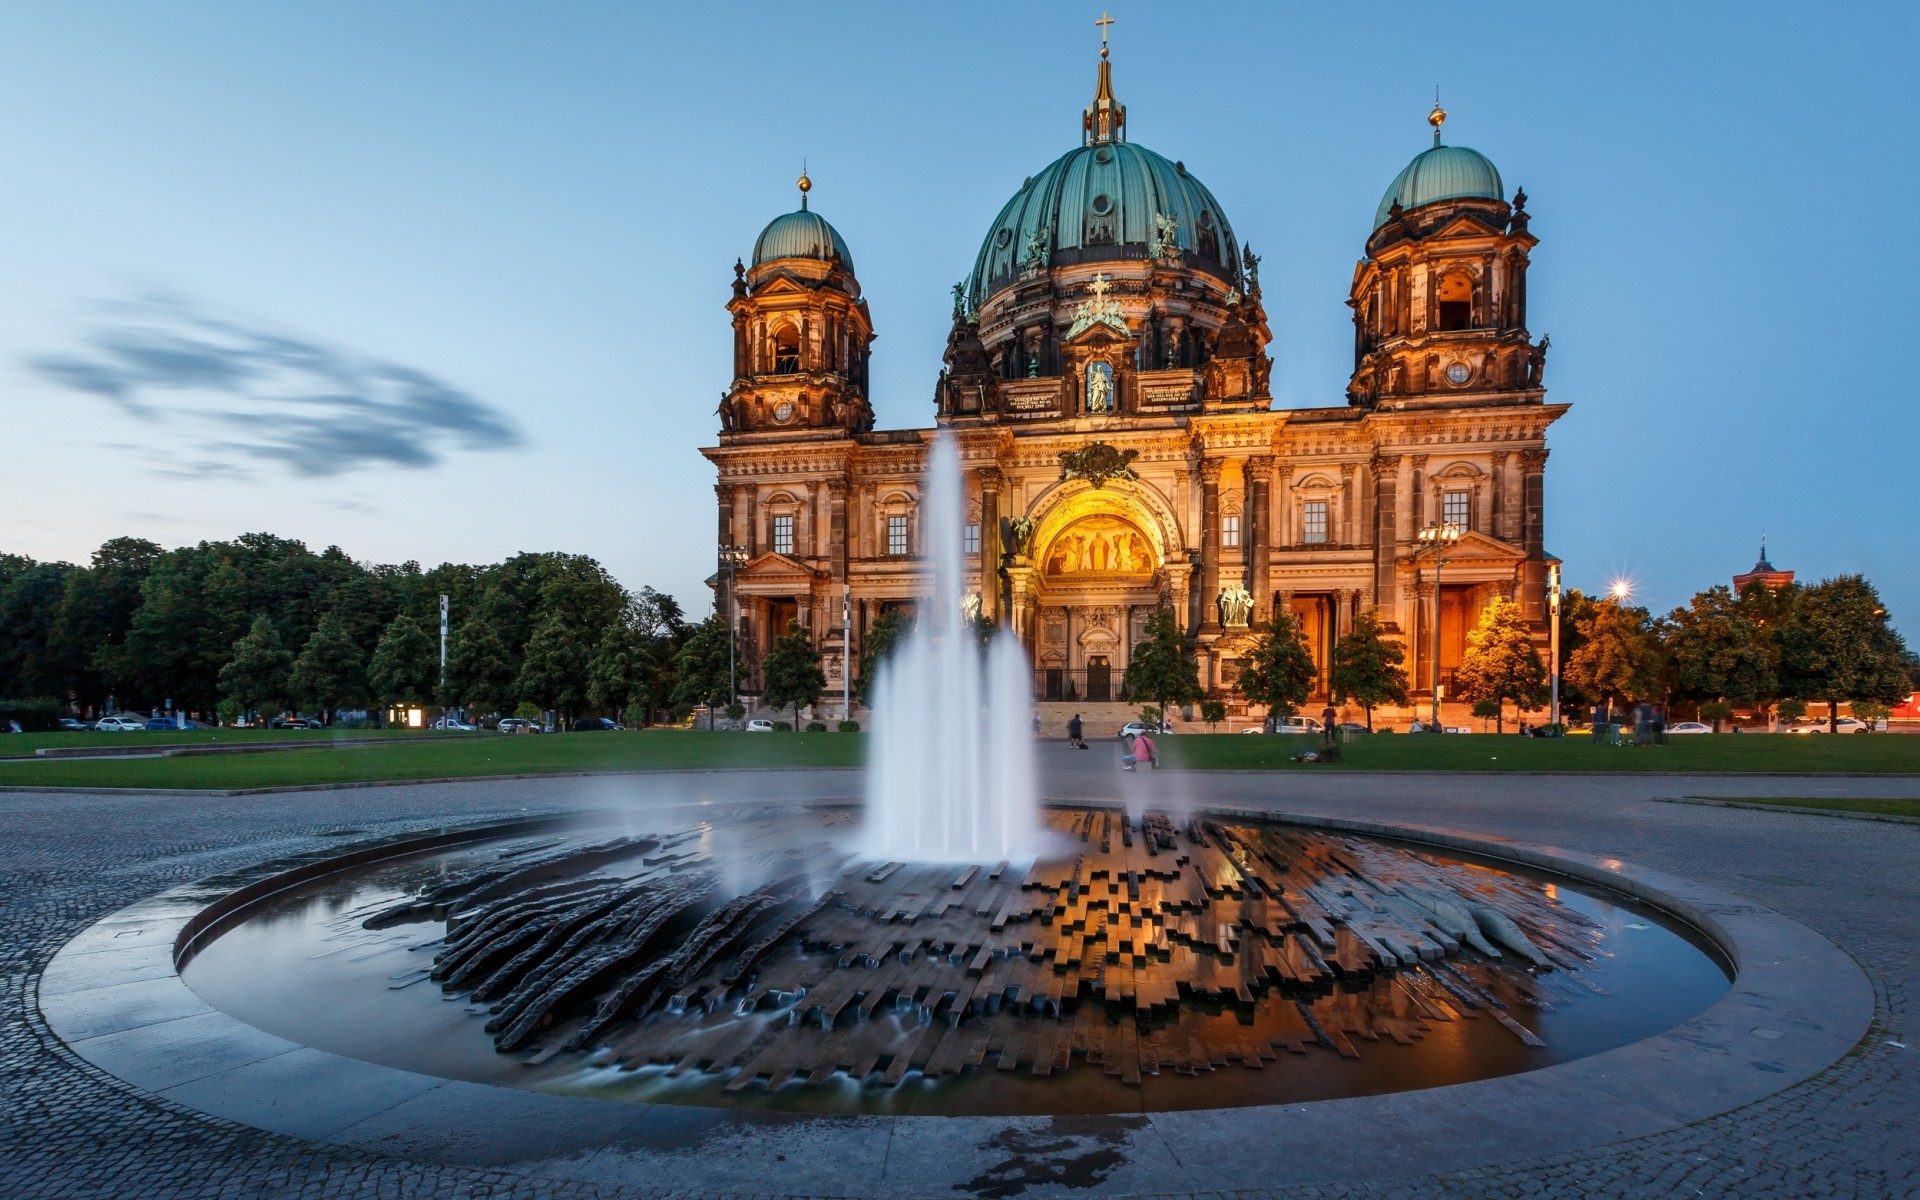 2023/09/334421-architecture-castle-water-clouds-berlin-germany-fountain-cathedral-trees-field-dome-sculpture-long-exposure-lights